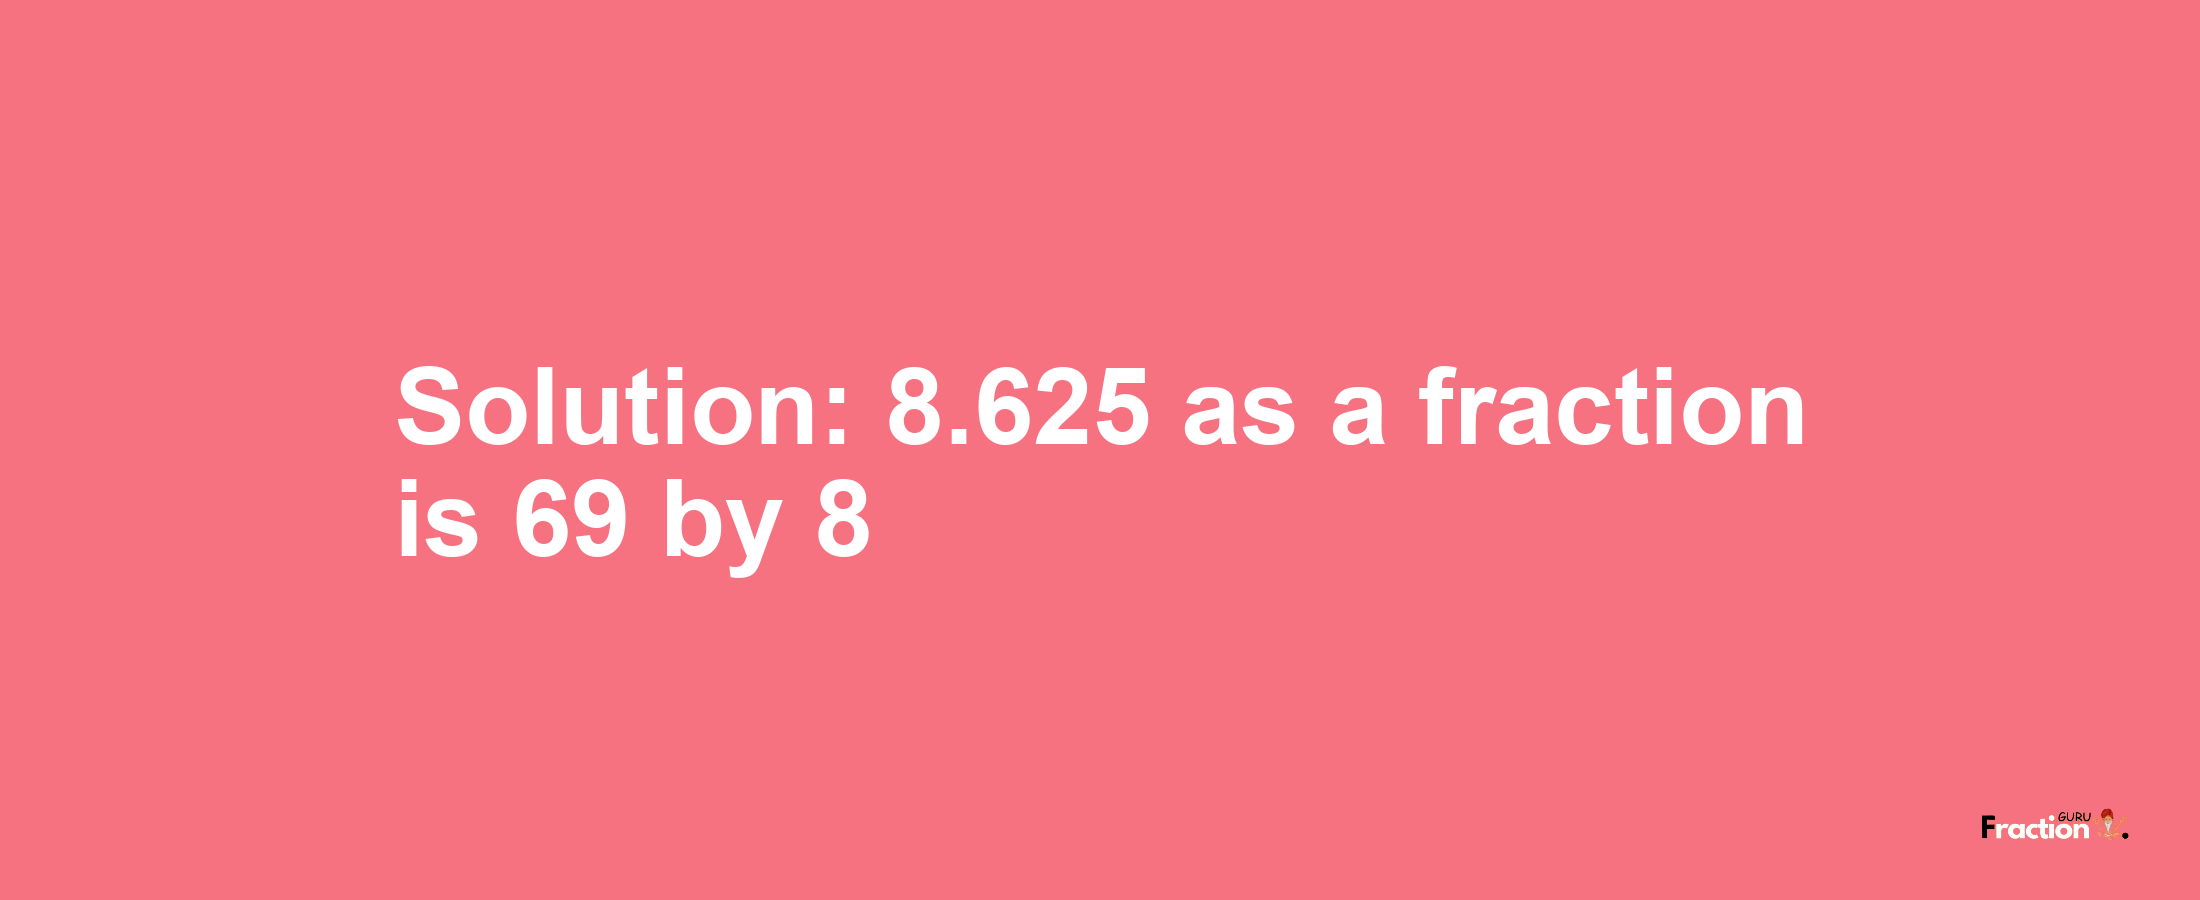 Solution:8.625 as a fraction is 69/8